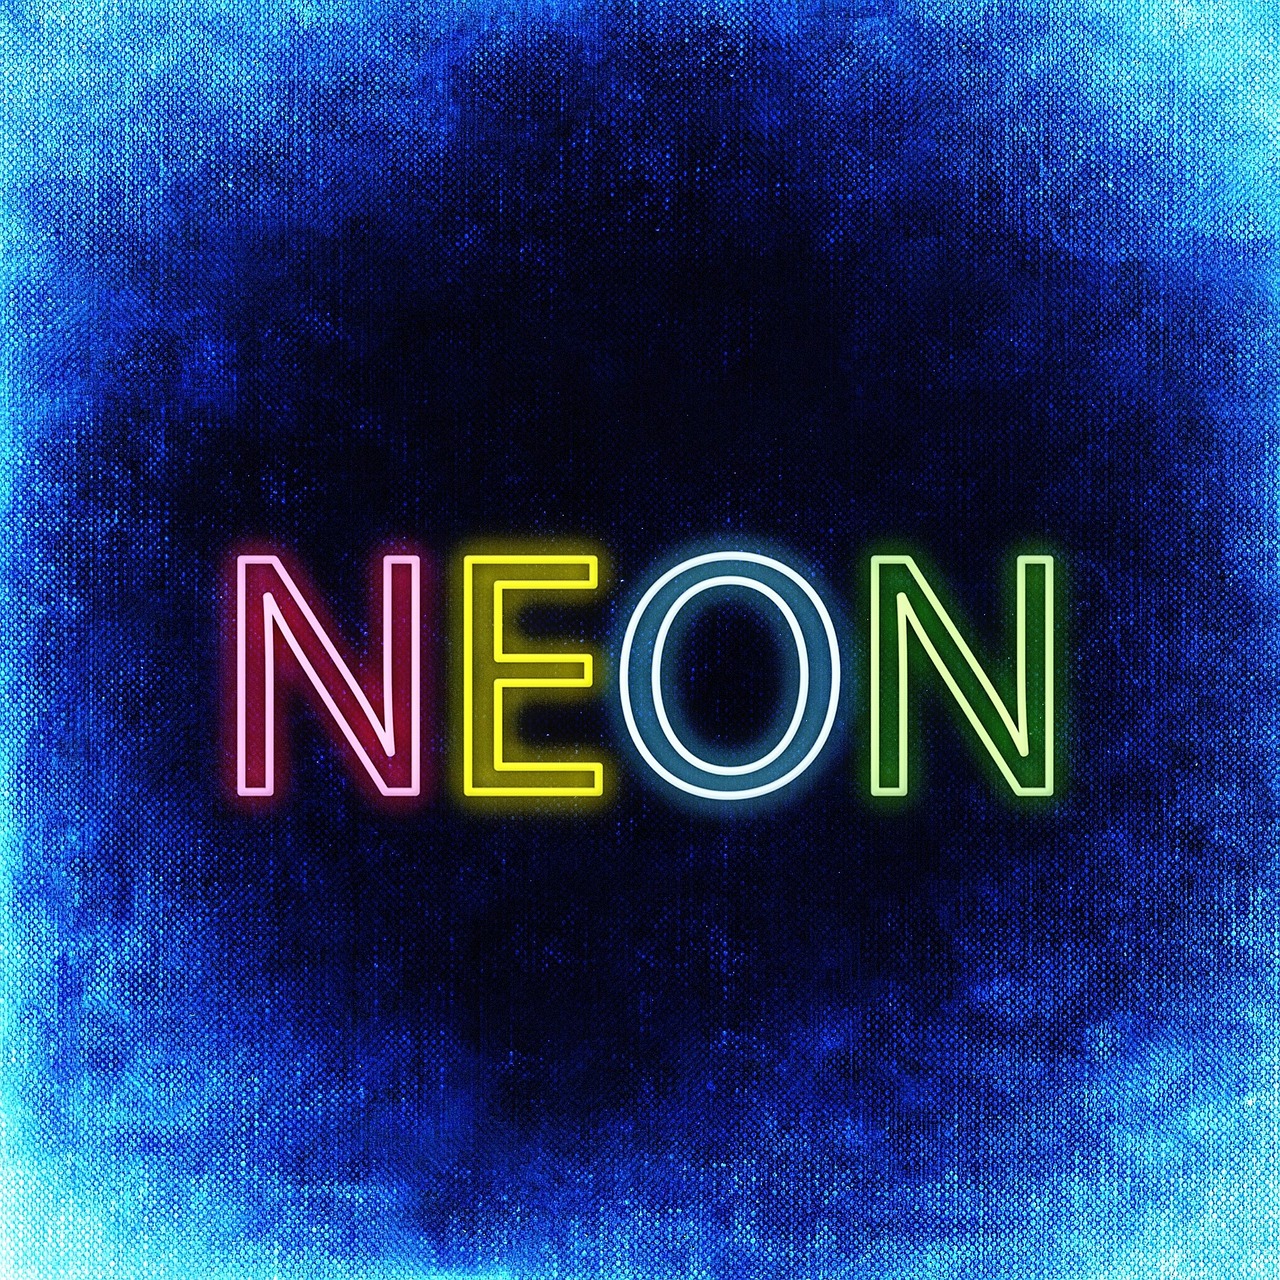 neon font lettering free photo